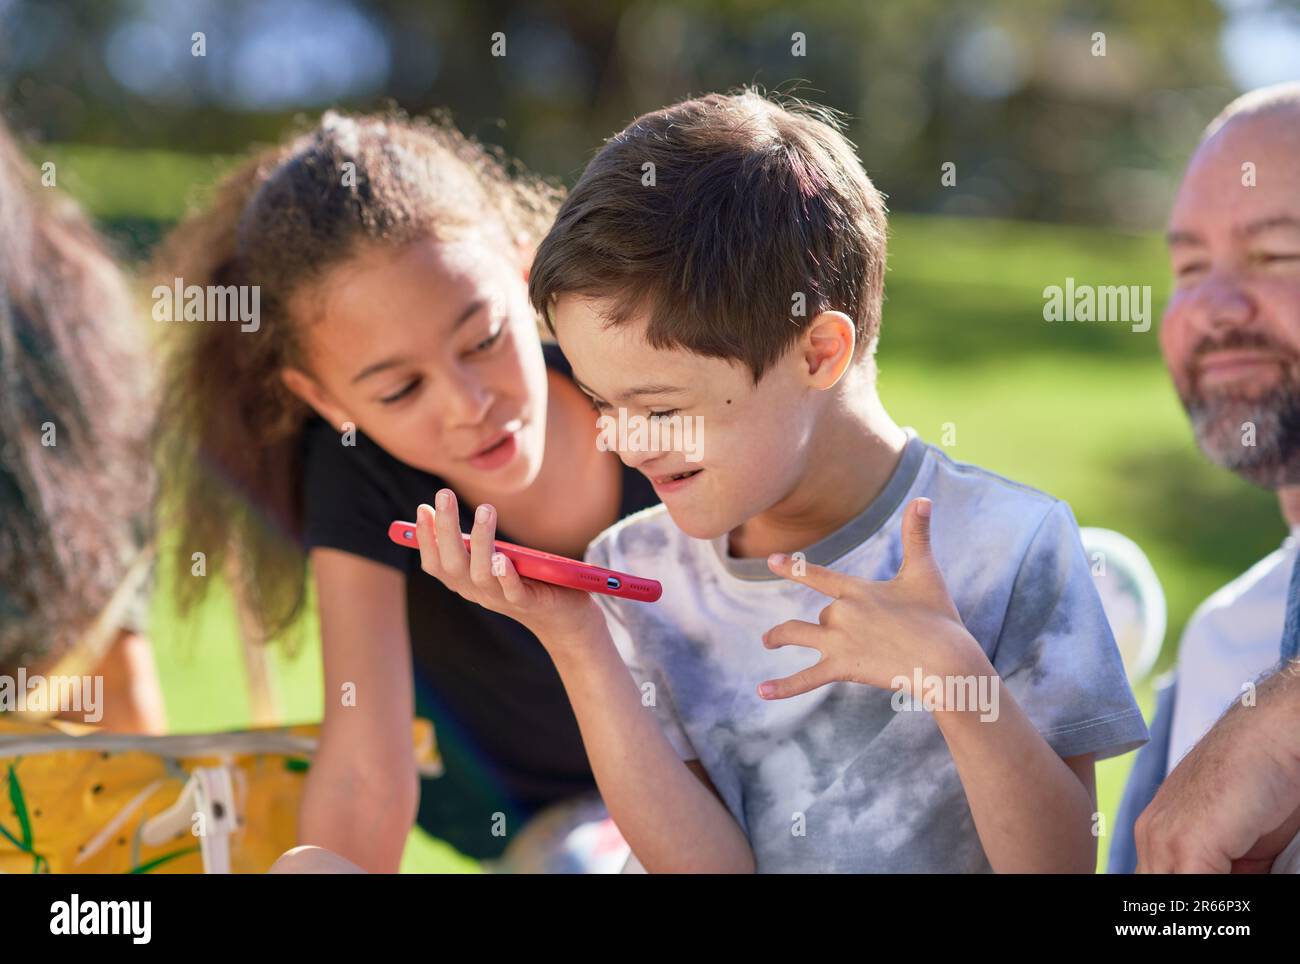 Sister watching brother with Down Syndrome using smart phone in park Stock Photo